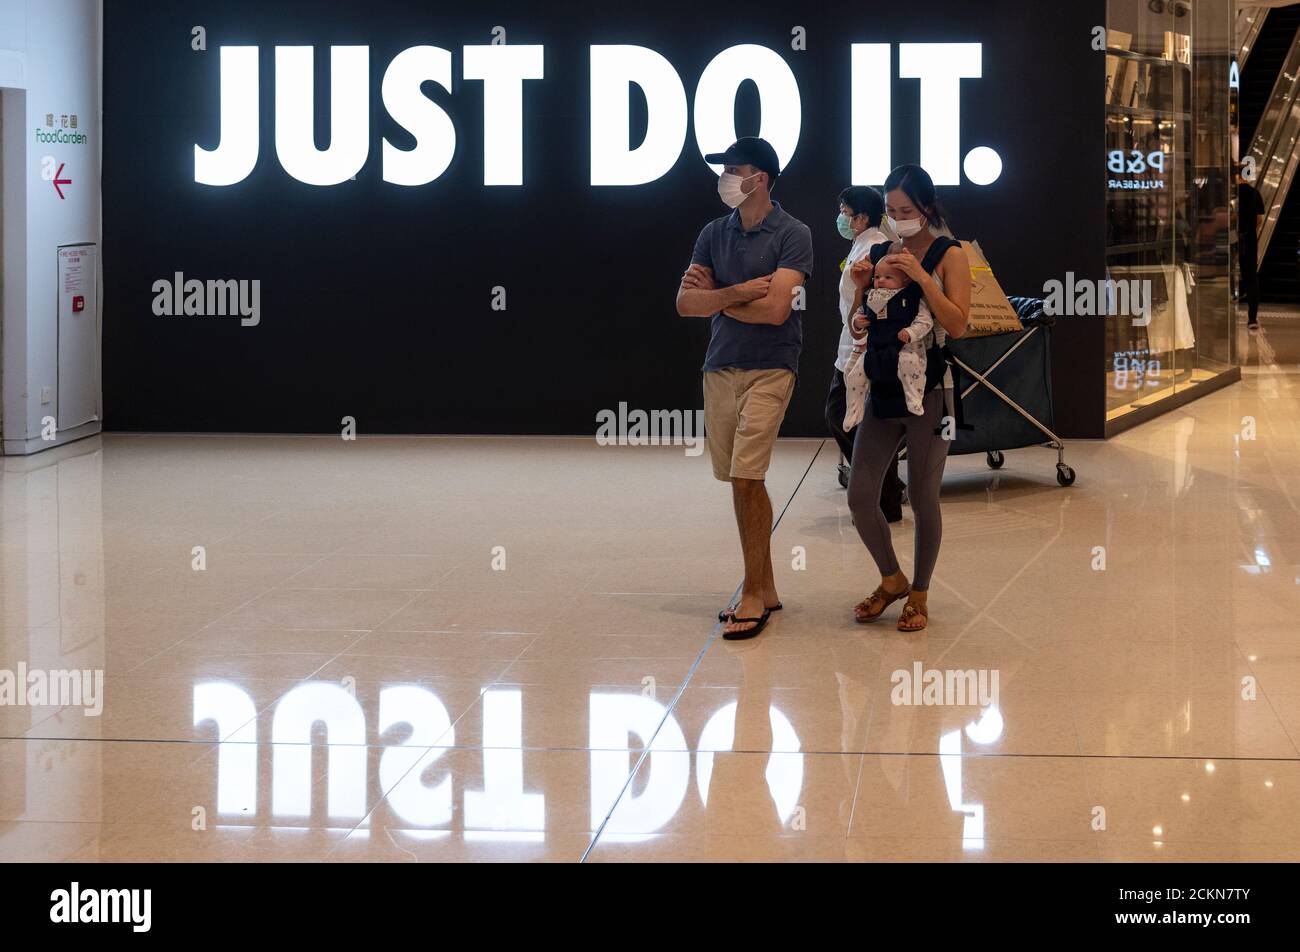 just do it store